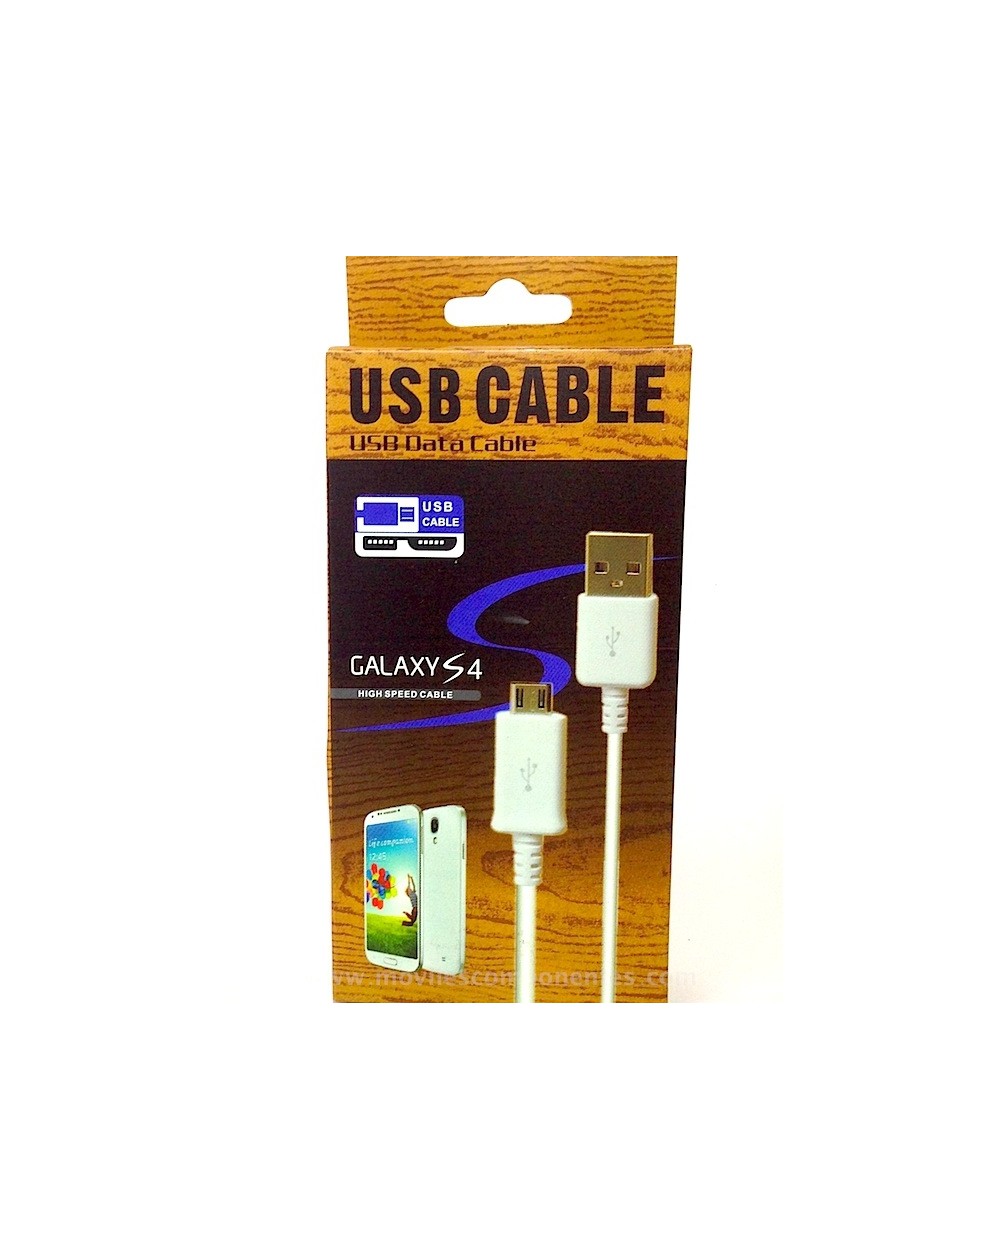 Cable Cargador Micro usb Android